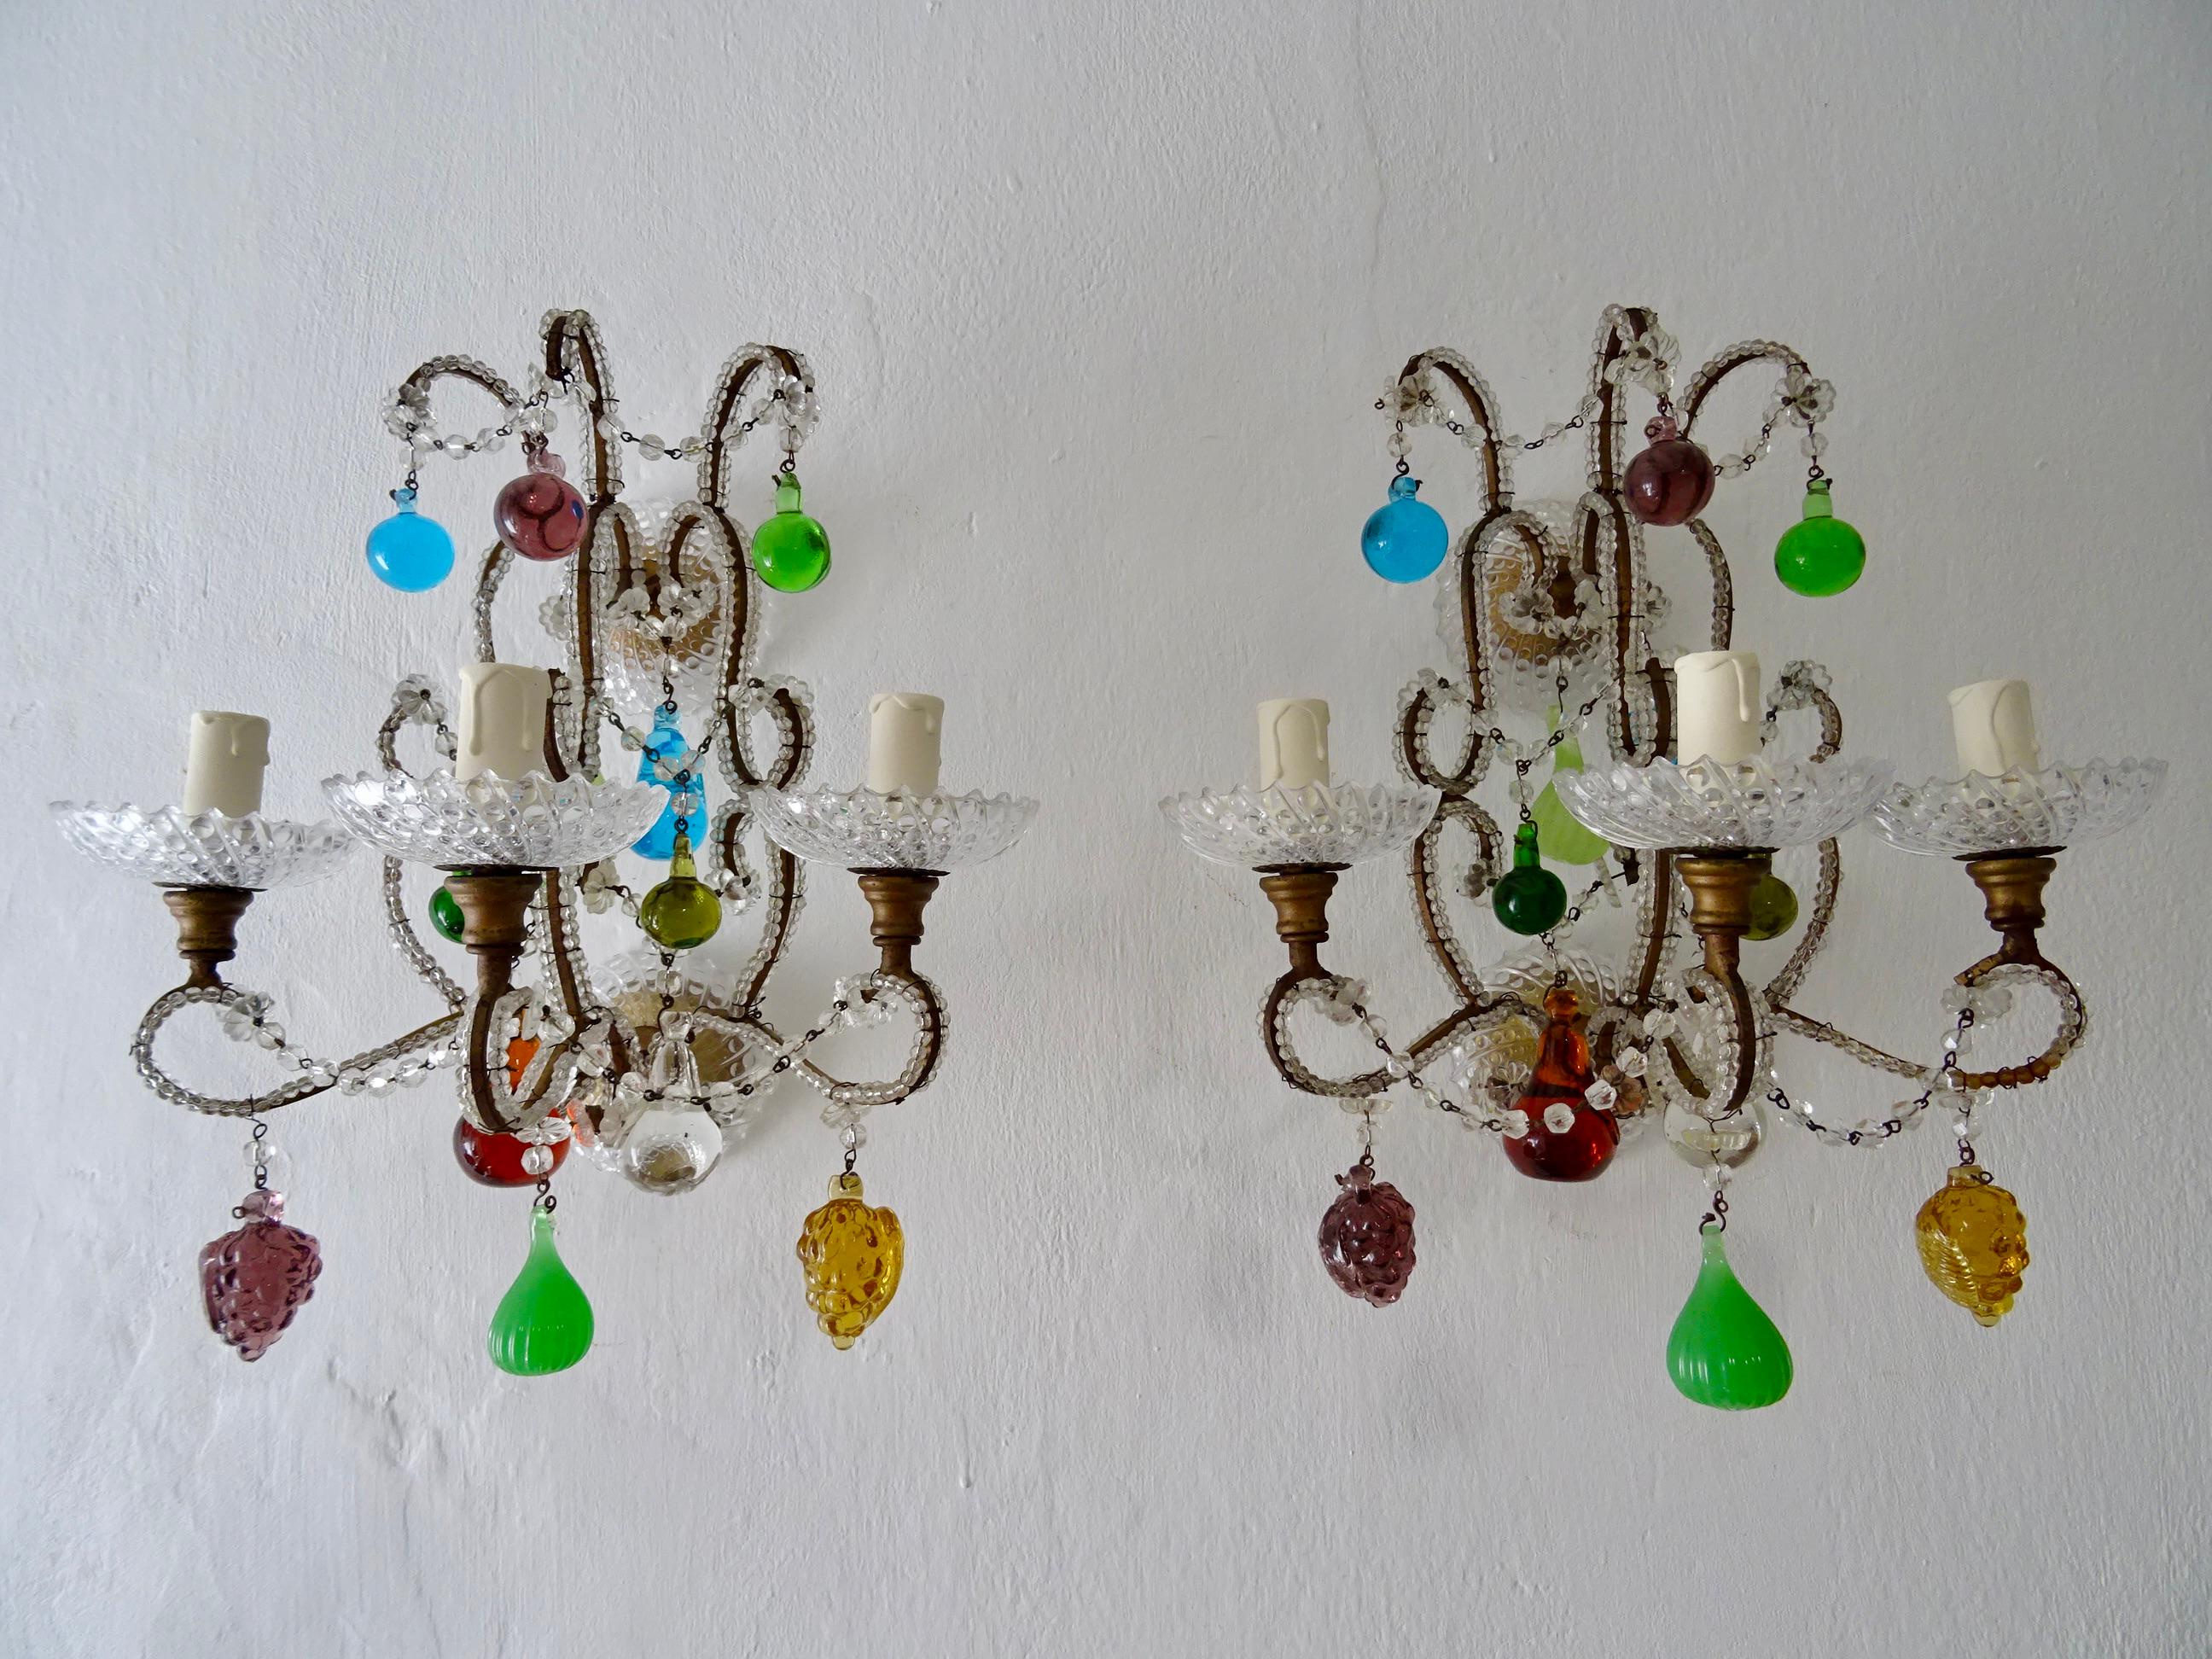 Housing 3 lights each, sitting in rare crystal bobeches.  Double beaded with florets throughout.  Adorning Murano fruit and colored balls.  Back plates have the same bobeches.  Will be wired with certified UL US sockets for the USA and appropriate